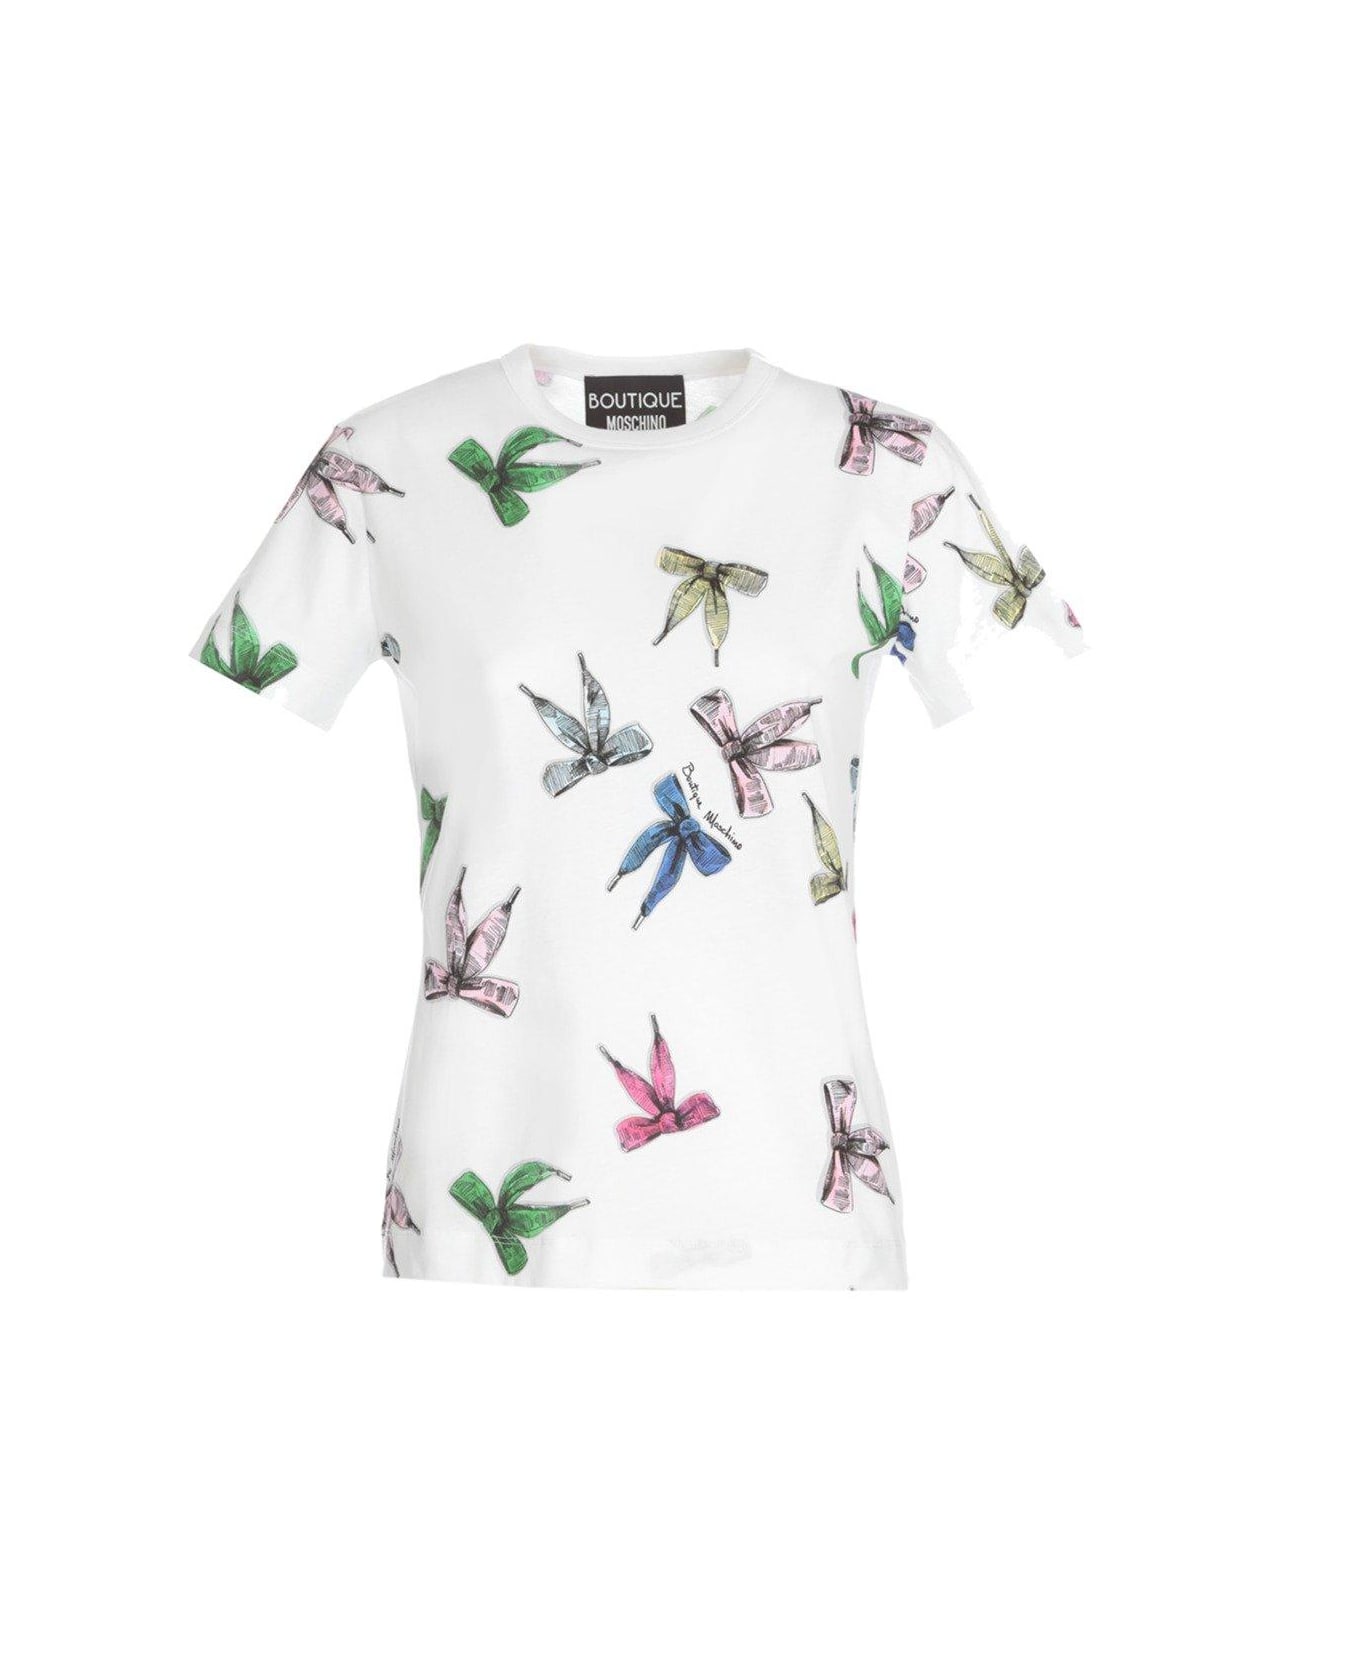 Boutique Moschino All-over Flakes Printed Crewneck T-shirt - White